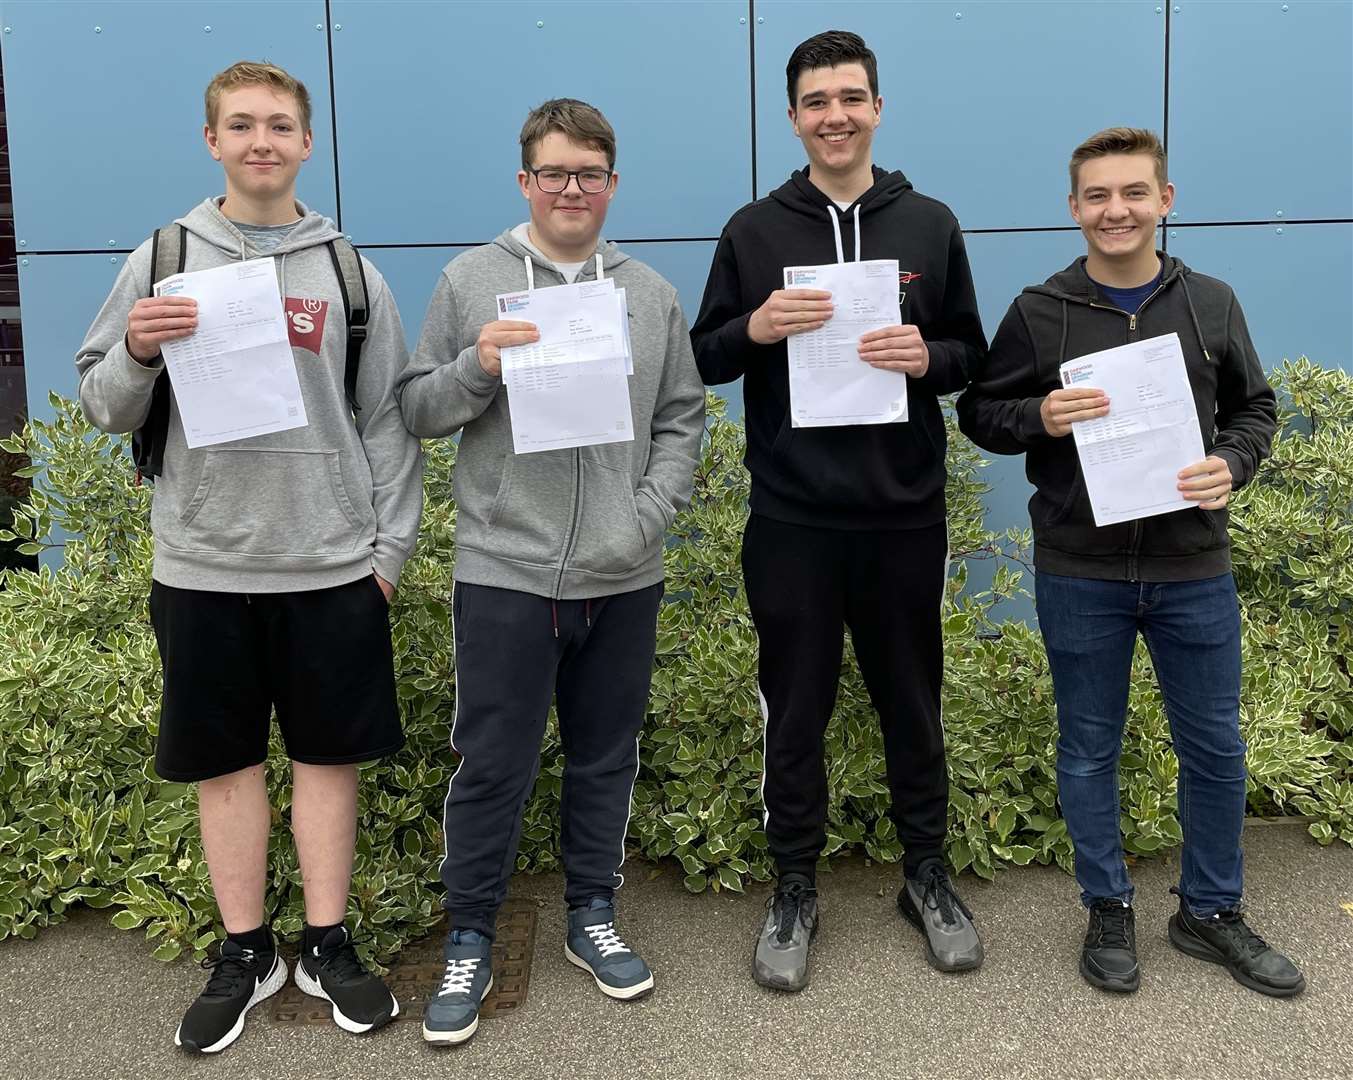 Saull John, Jack Wilson, Christian Woodward and George Brown from Oakwood Park Grammar School celebrating on GCSE results day